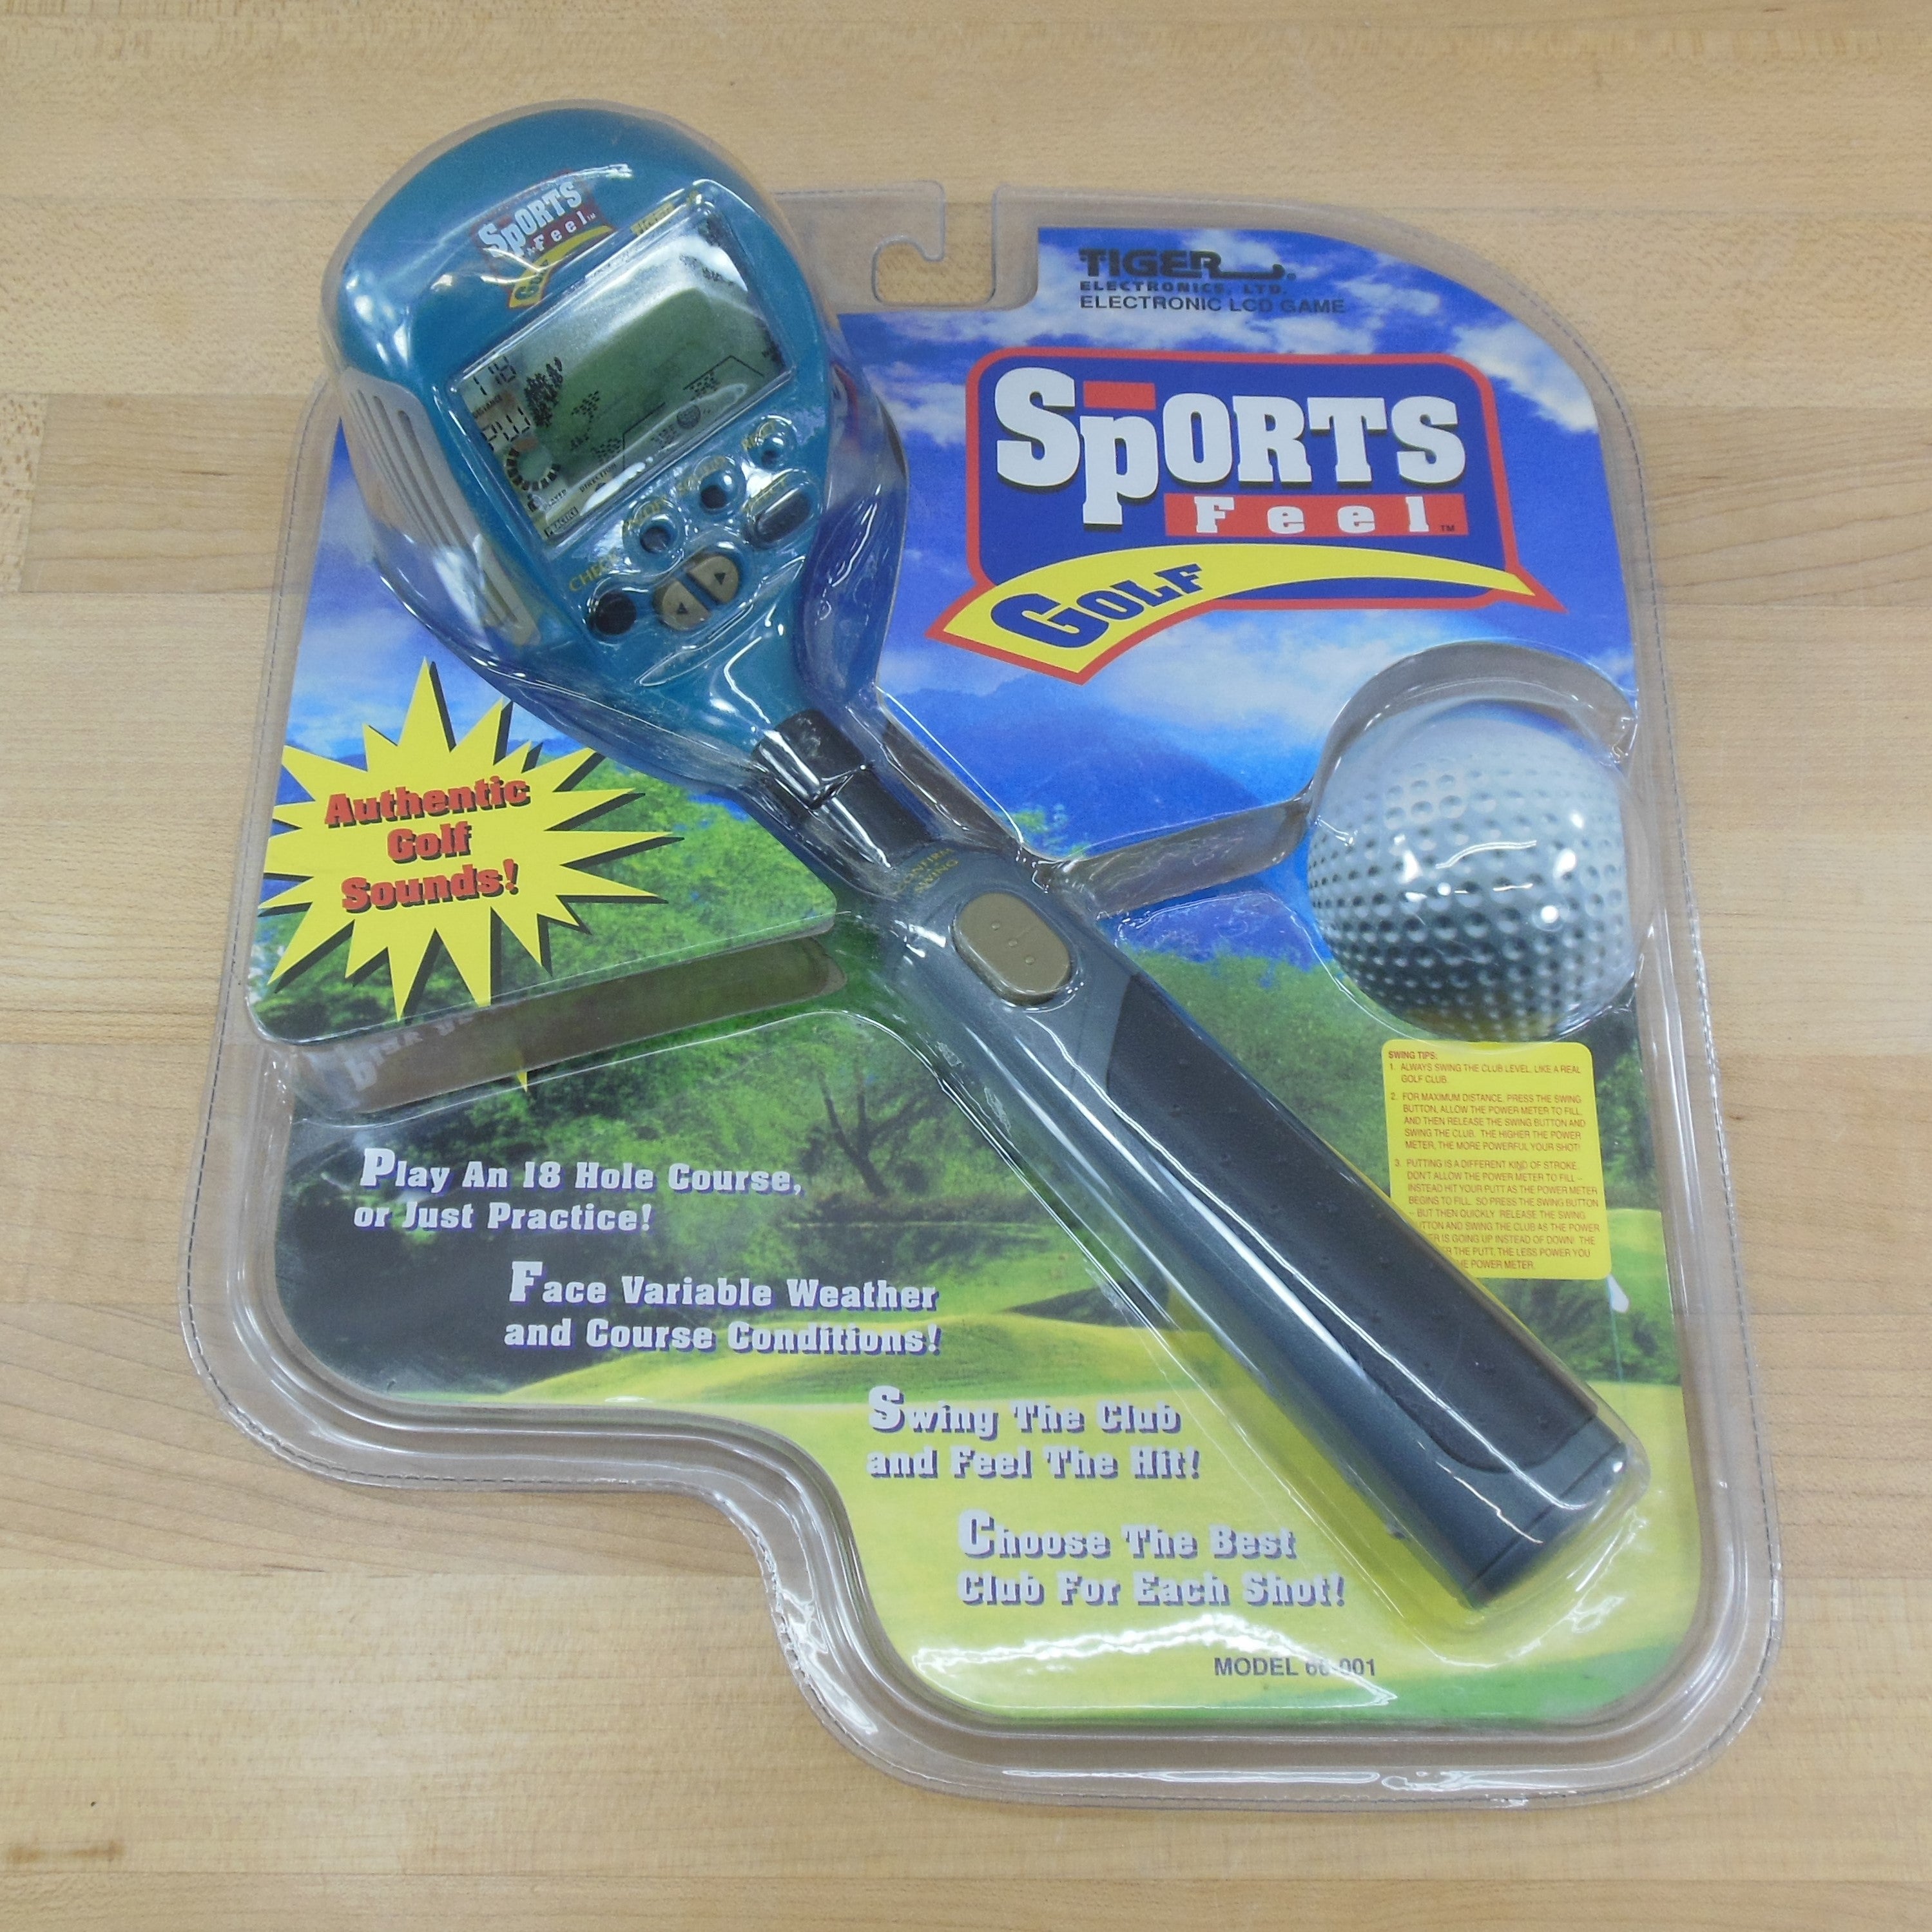 Tiger Electronics 1998 Sports Feel Game Sealed Package New – Olde